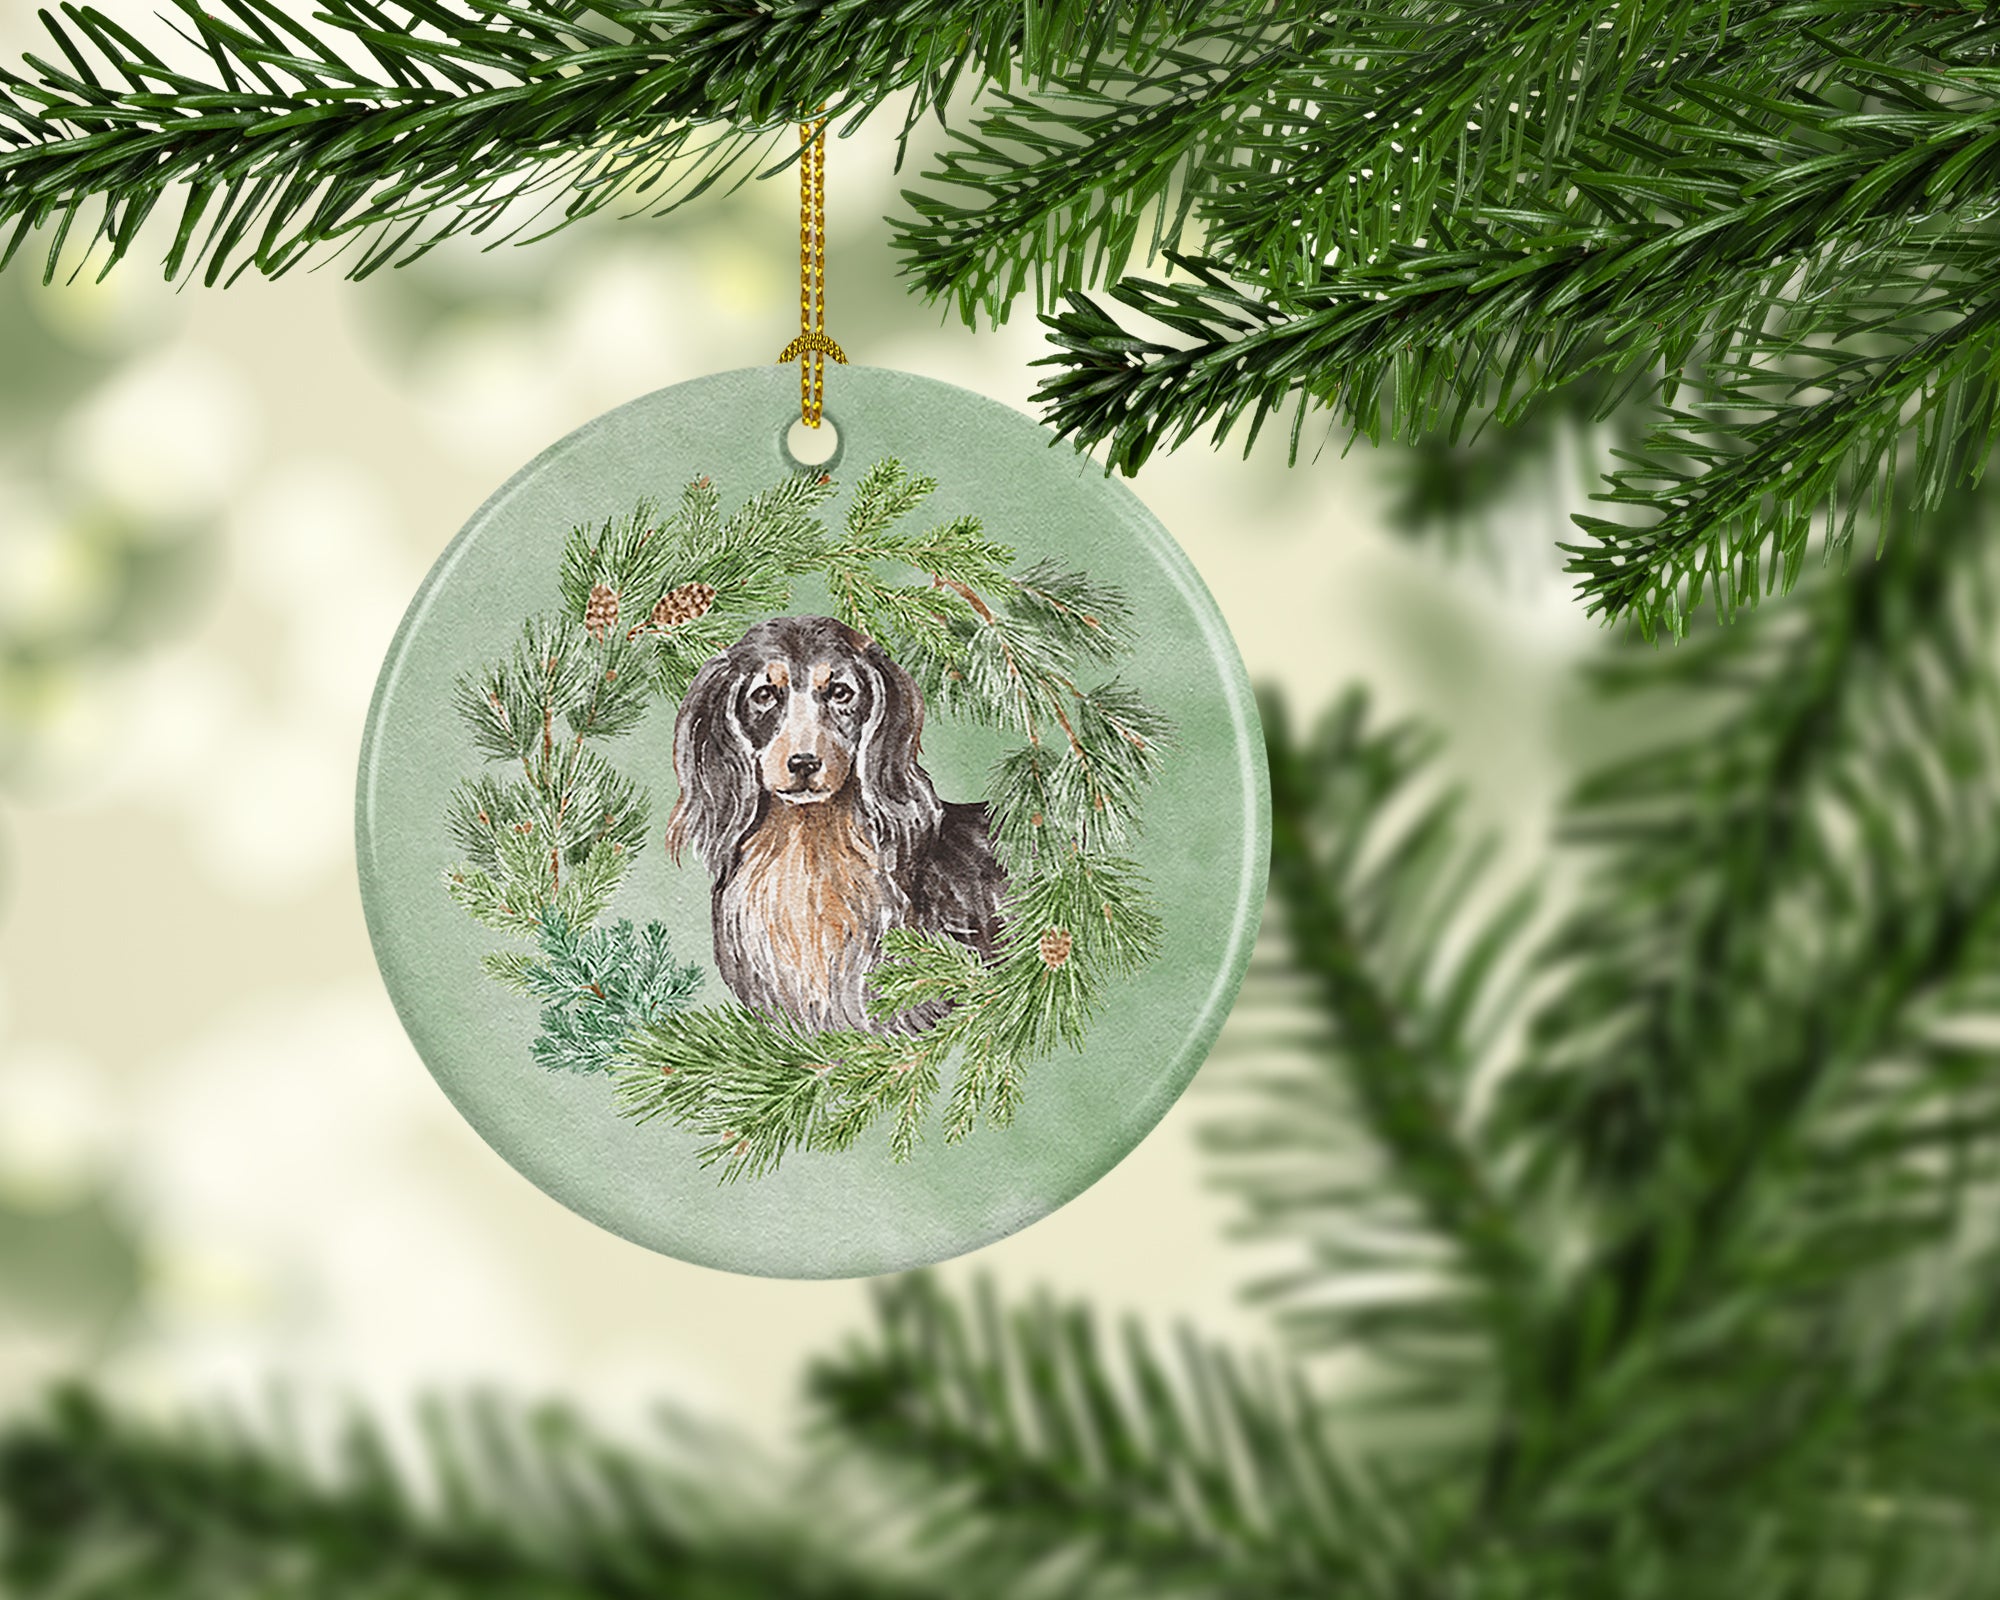 Buy this Dachshund Black and Tan Longhaired  Christmas Wreath Ceramic Ornament